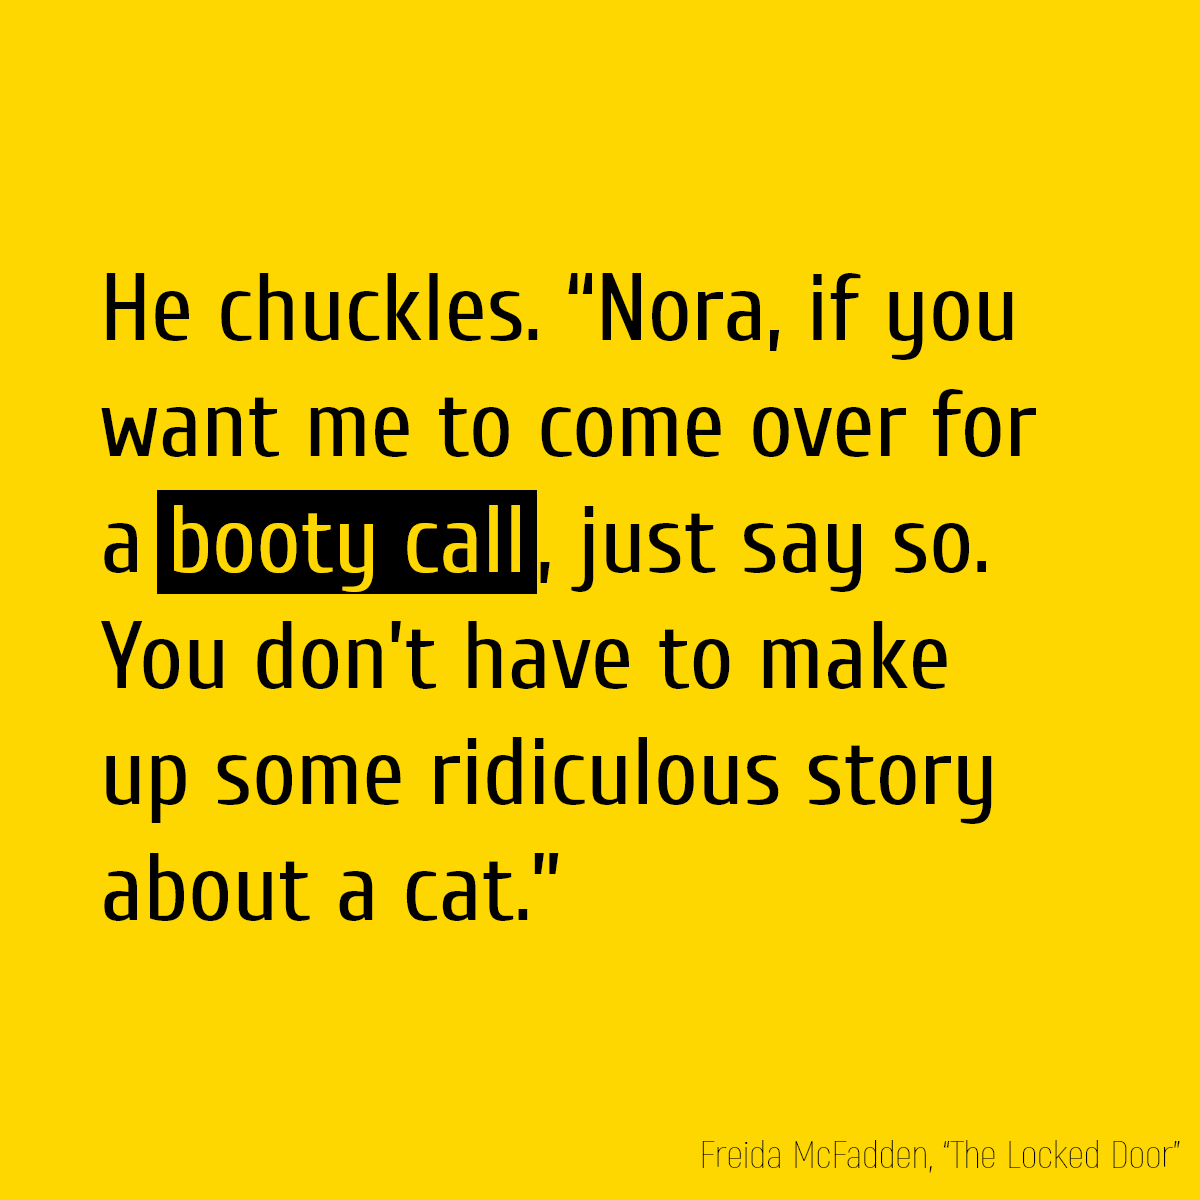 He chuckles. “Nora, if you want me to come over for a **booty call**, just say so. You don’t have to make up some ridiculous story about a cat.”